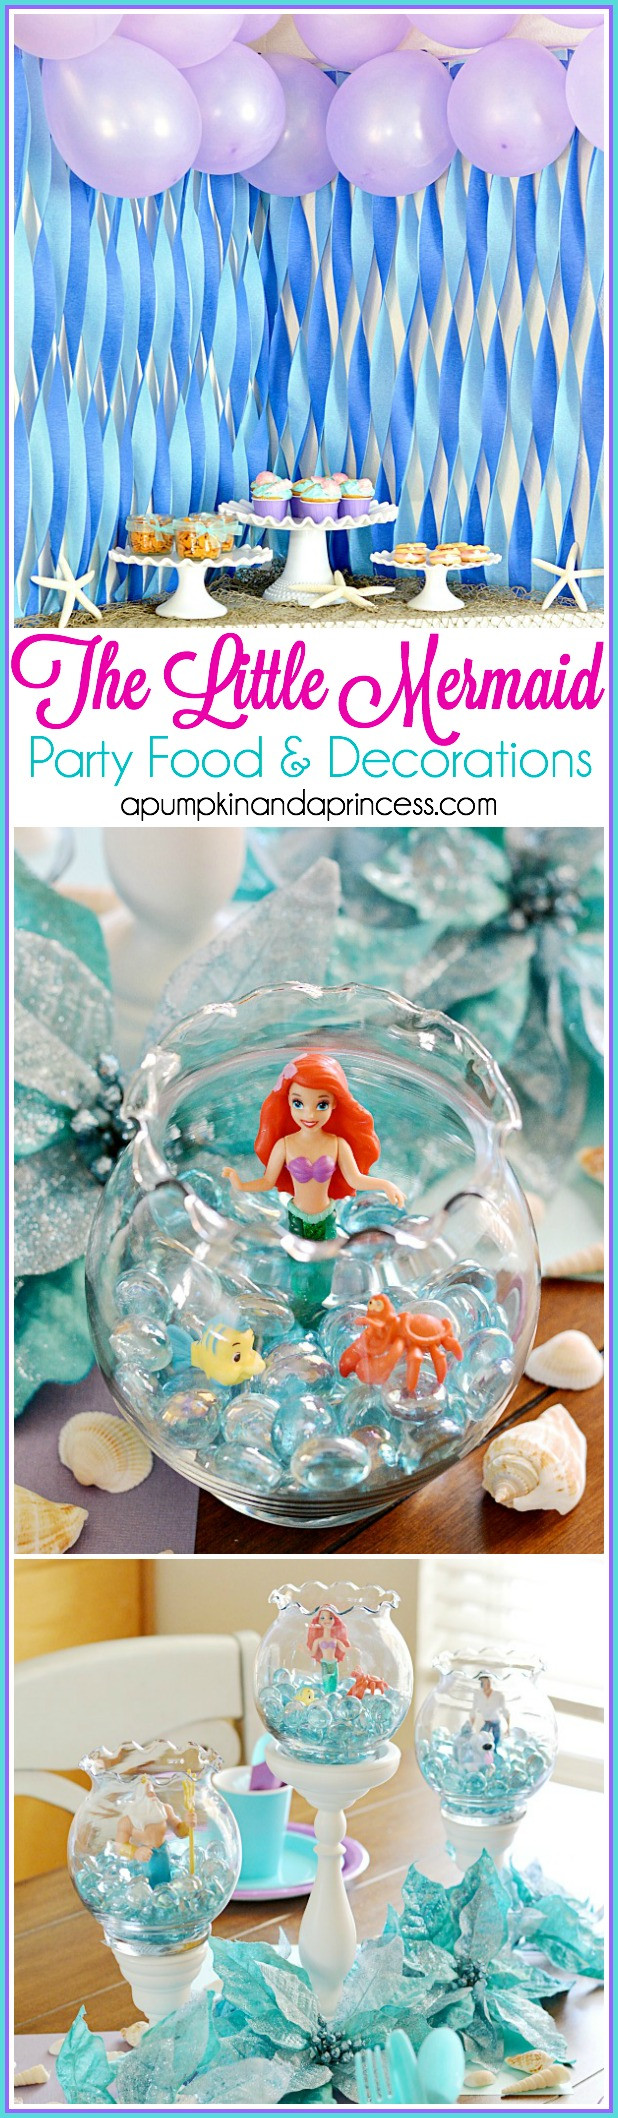 Mermaid Birthday Party Decorations
 The Little Mermaid Party A Pumpkin And A Princess